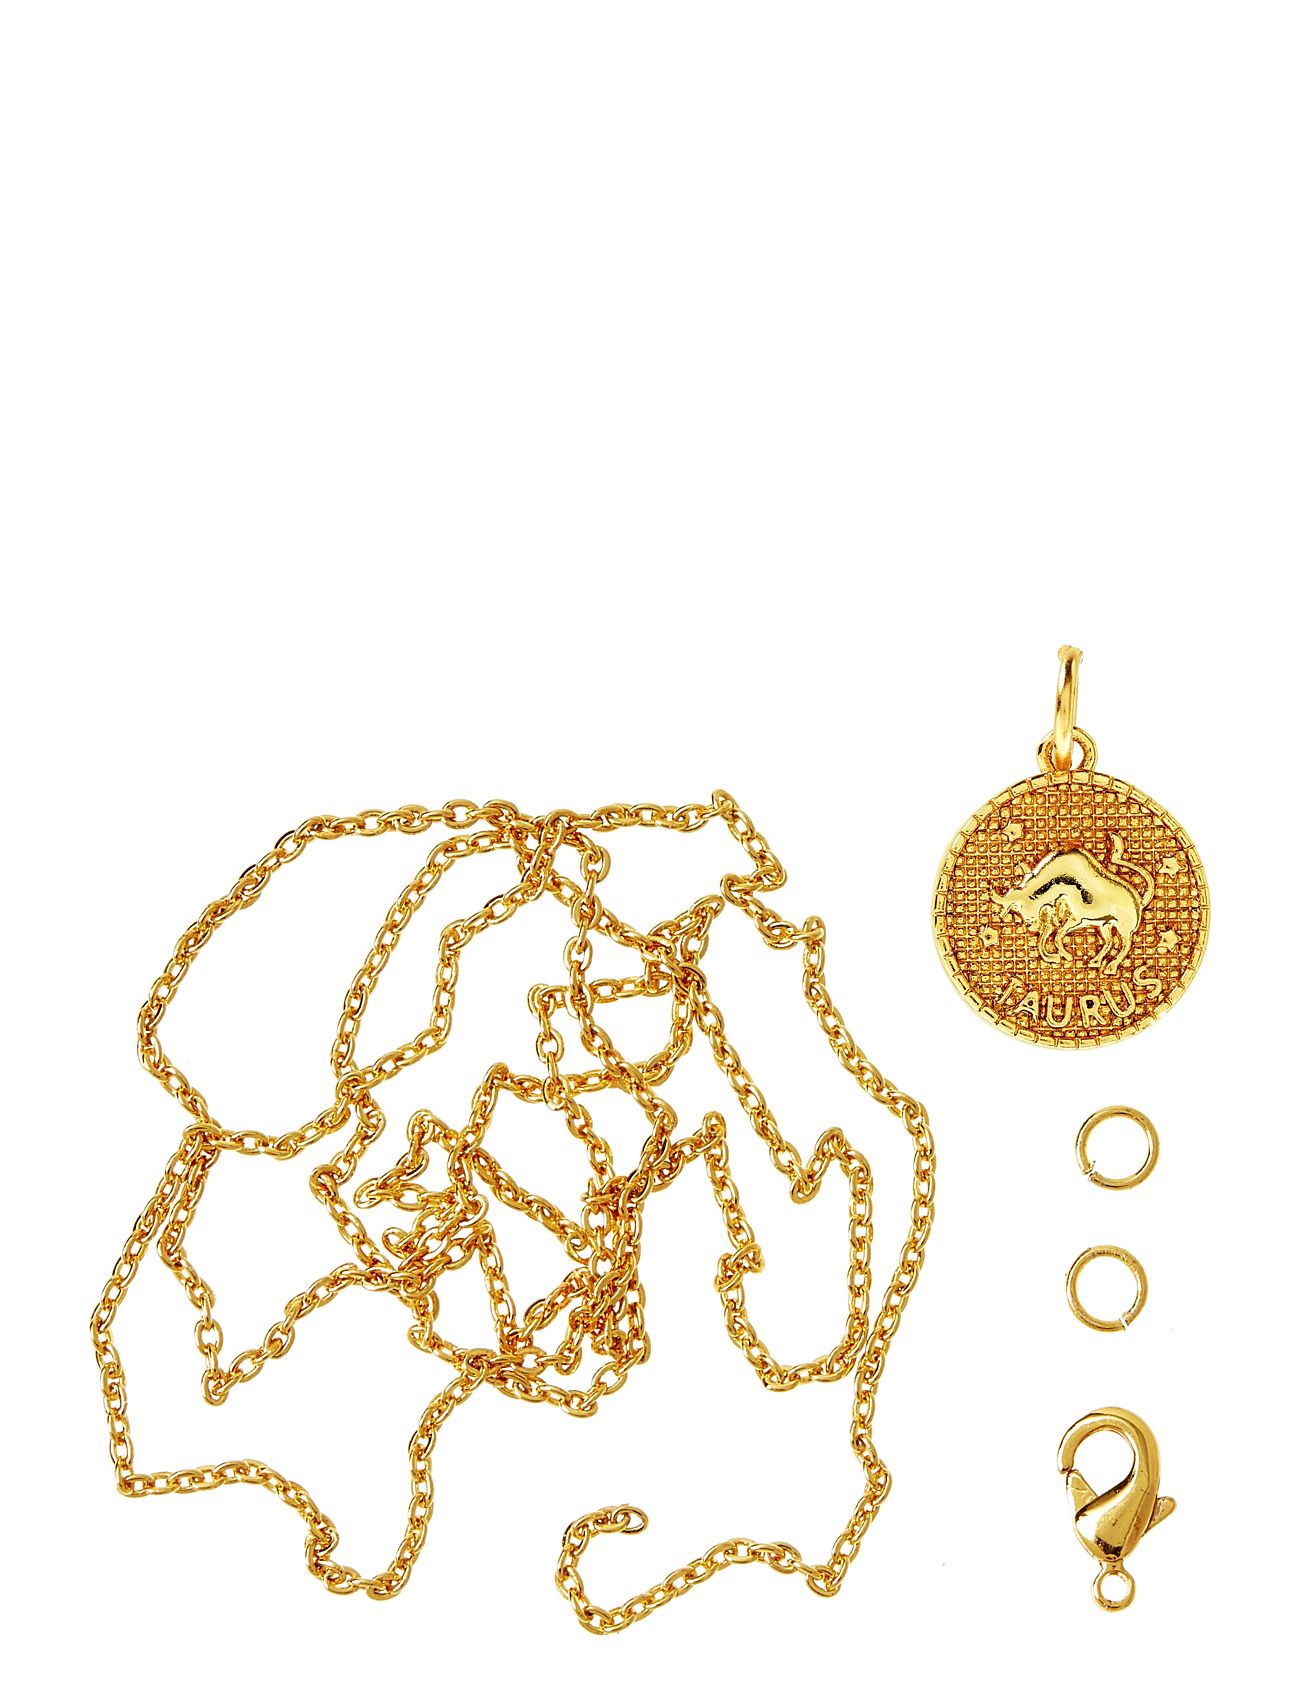 Zodiac Coin Pendant And Chain Set, Taurus Toys Creativity Drawing & Crafts Craft Jewellery & Accessories Gold Me & My Box